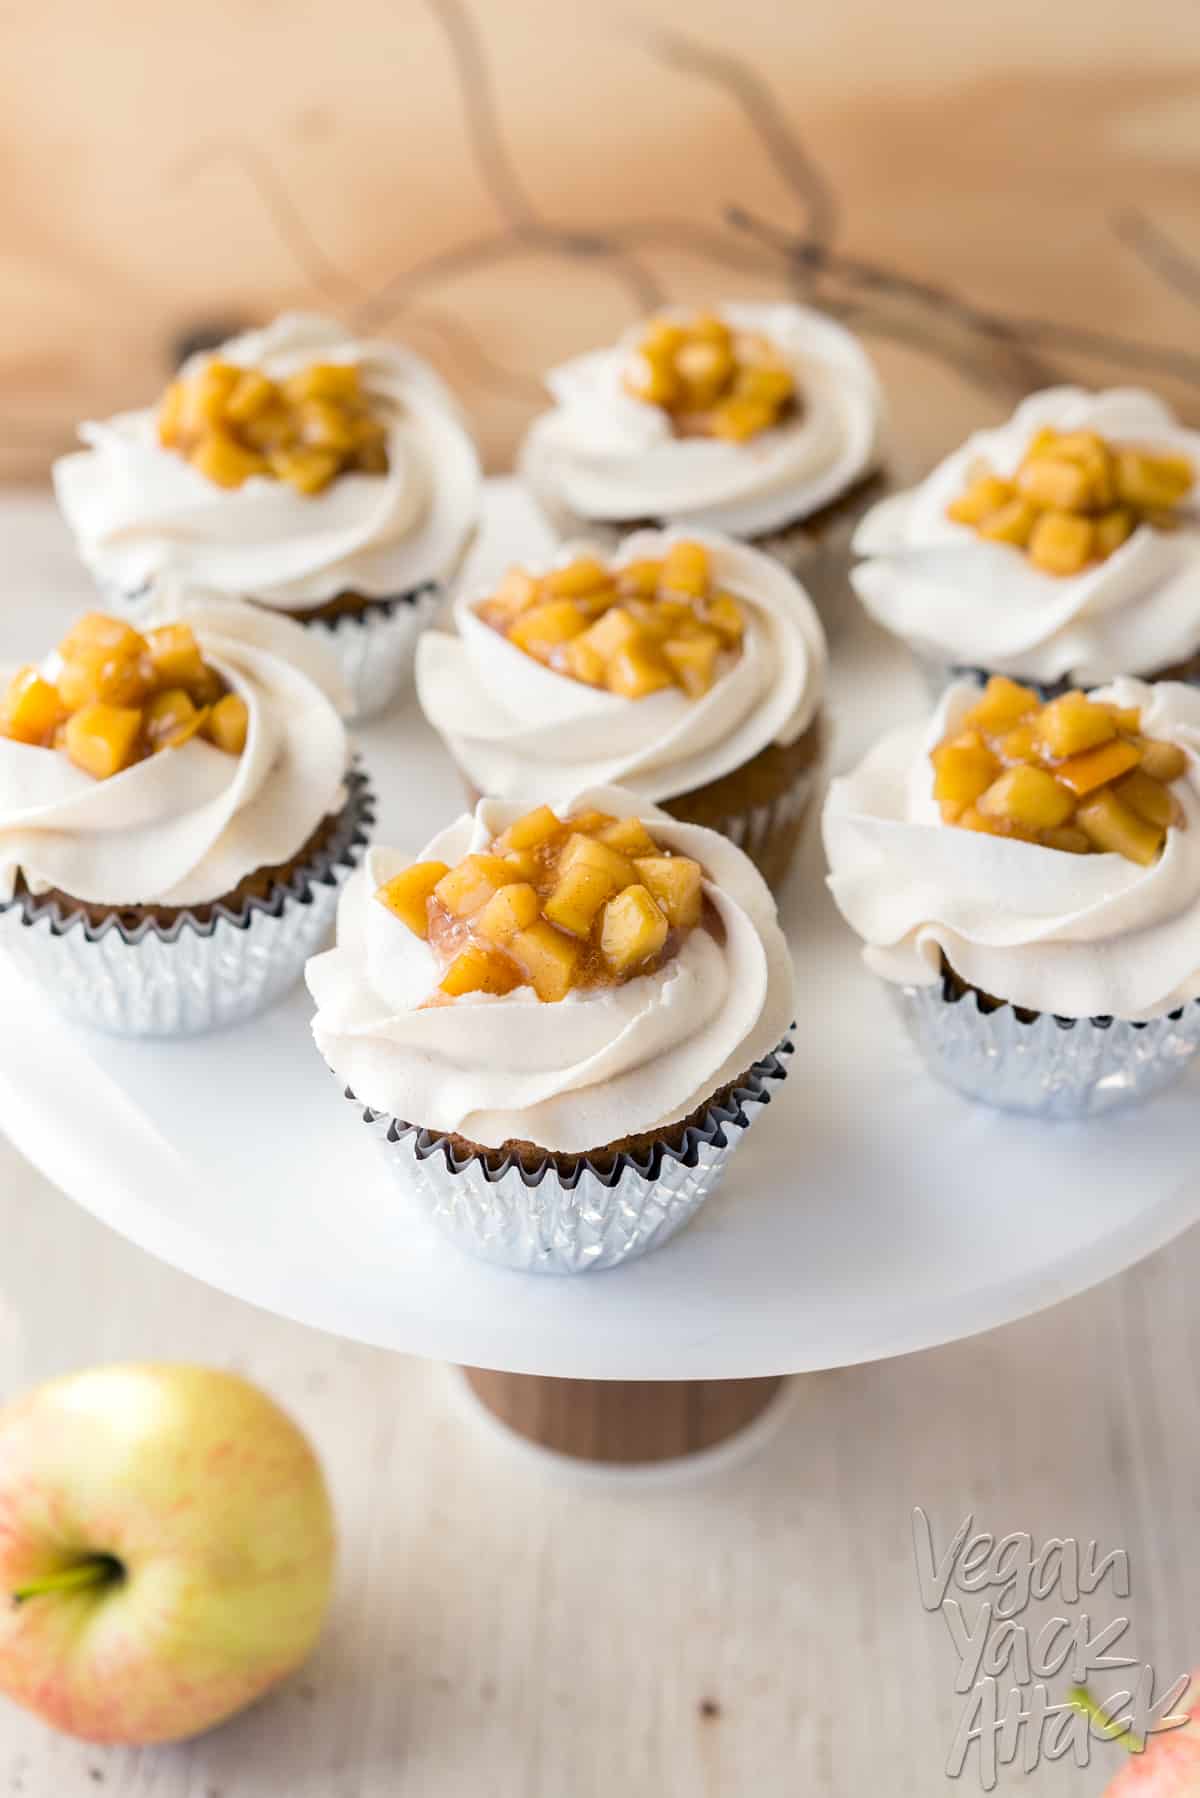 Image of cupcakes on a cake stand with apple pie filling in the middle of vanilla frosting